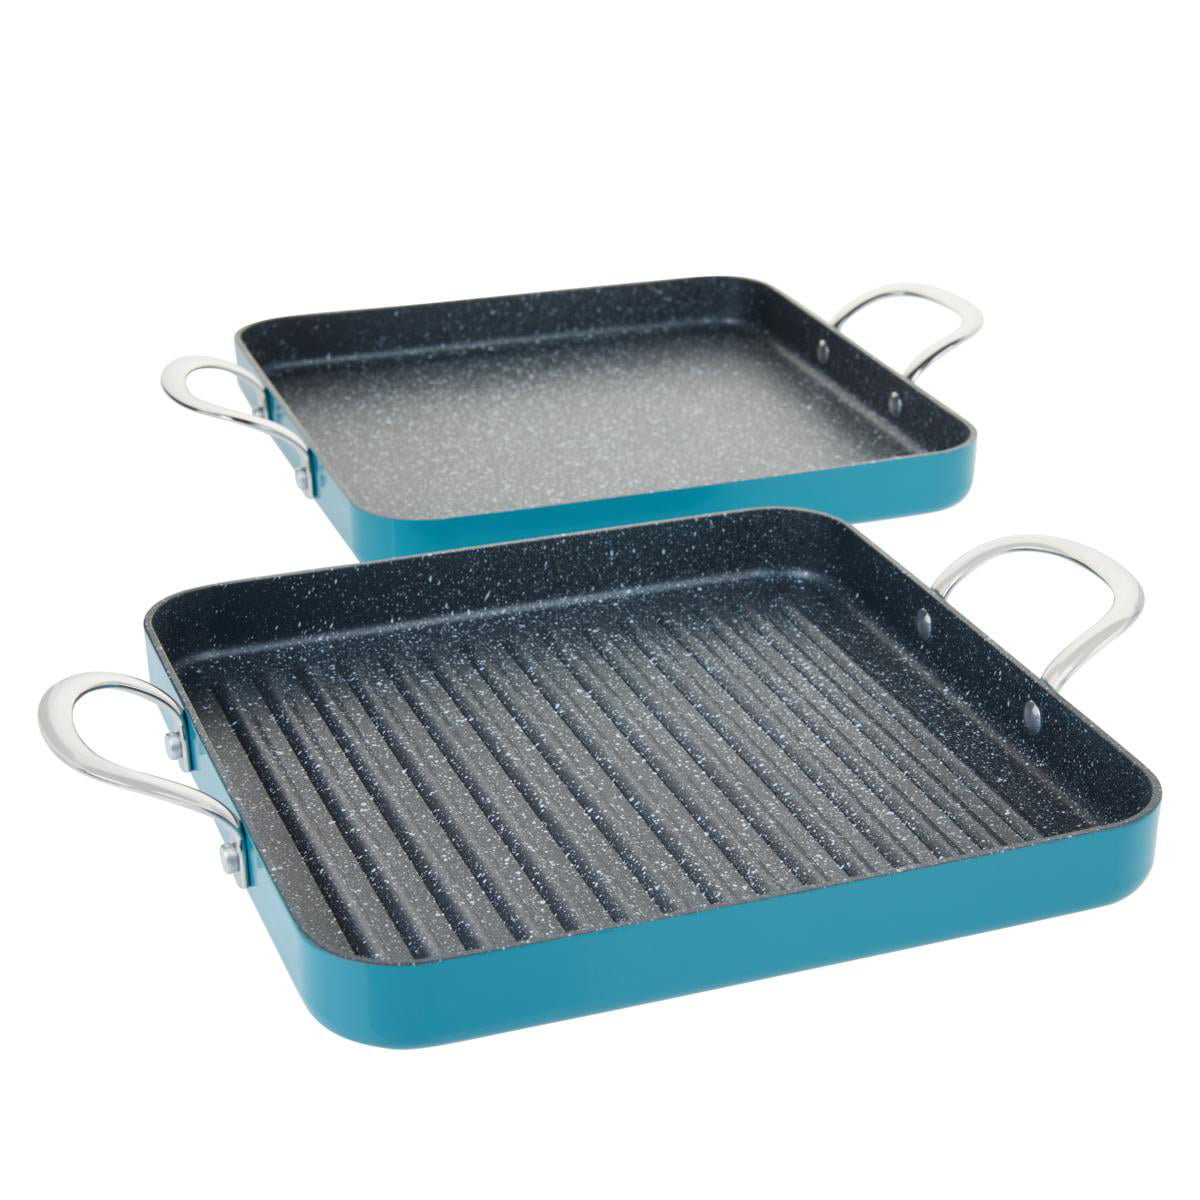 Curtis Stone Dura-Pan Nonstick Square Grill Pan and Griddle Pan Model 672-799